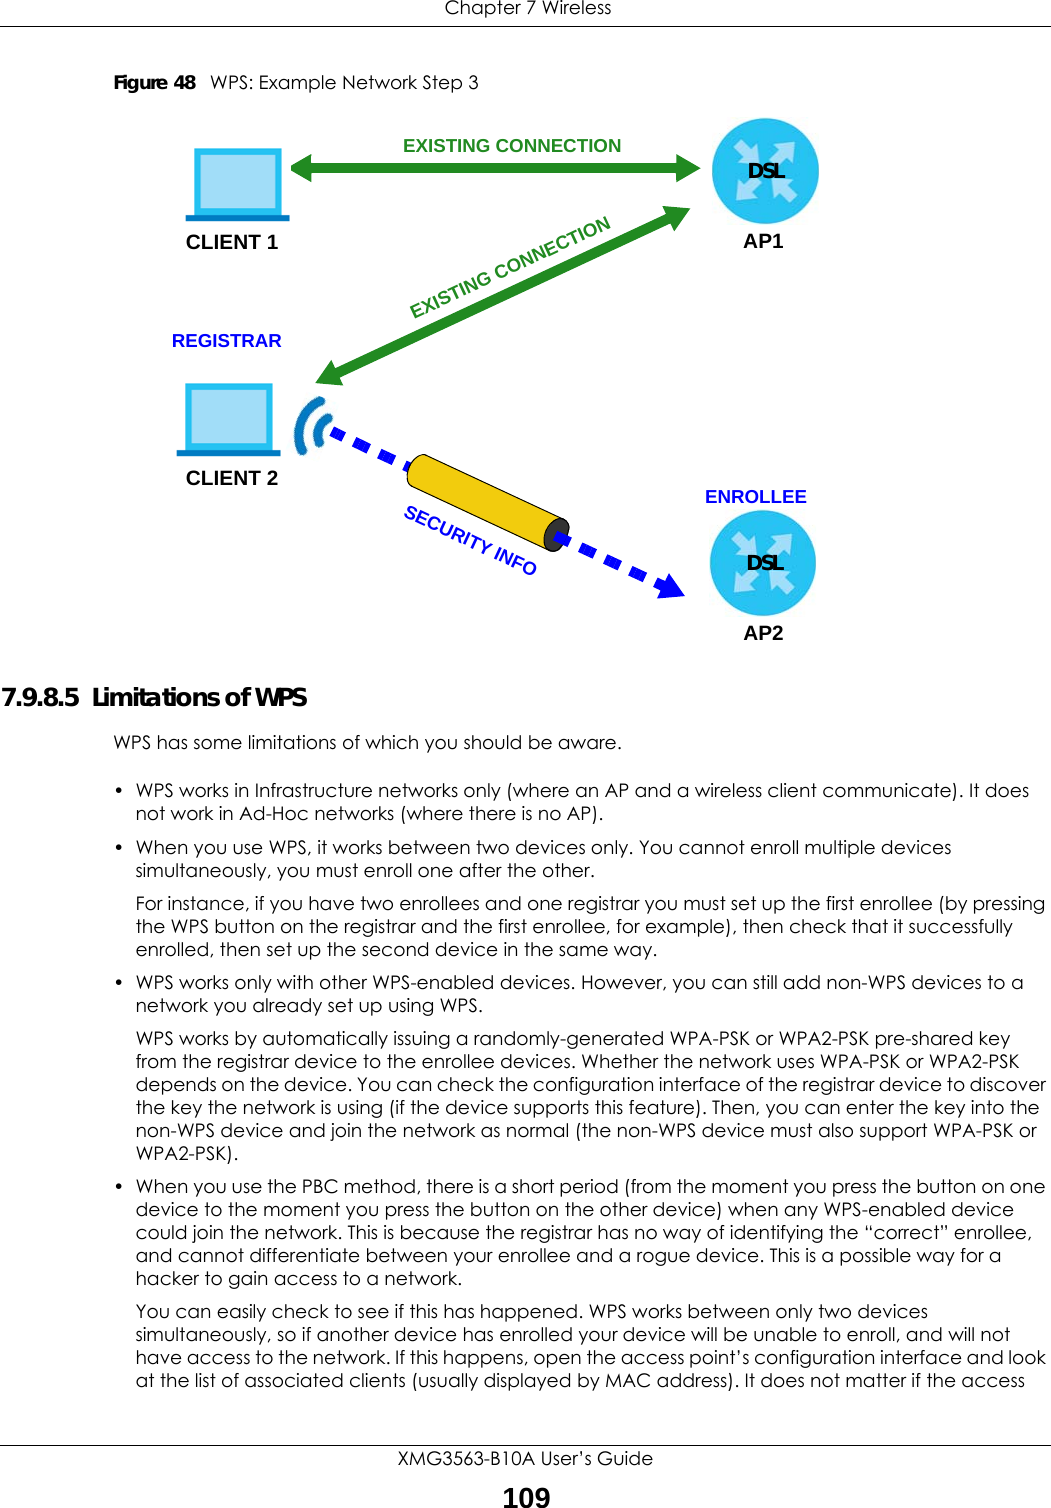  Chapter 7 WirelessXMG3563-B10A User’s Guide109Figure 48   WPS: Example Network Step 37.9.8.5  Limitations of WPSWPS has some limitations of which you should be aware. • WPS works in Infrastructure networks only (where an AP and a wireless client communicate). It does not work in Ad-Hoc networks (where there is no AP).• When you use WPS, it works between two devices only. You cannot enroll multiple devices simultaneously, you must enroll one after the other. For instance, if you have two enrollees and one registrar you must set up the first enrollee (by pressing the WPS button on the registrar and the first enrollee, for example), then check that it successfully enrolled, then set up the second device in the same way.• WPS works only with other WPS-enabled devices. However, you can still add non-WPS devices to a network you already set up using WPS. WPS works by automatically issuing a randomly-generated WPA-PSK or WPA2-PSK pre-shared key from the registrar device to the enrollee devices. Whether the network uses WPA-PSK or WPA2-PSK depends on the device. You can check the configuration interface of the registrar device to discover the key the network is using (if the device supports this feature). Then, you can enter the key into the non-WPS device and join the network as normal (the non-WPS device must also support WPA-PSK or WPA2-PSK).• When you use the PBC method, there is a short period (from the moment you press the button on one device to the moment you press the button on the other device) when any WPS-enabled device could join the network. This is because the registrar has no way of identifying the “correct” enrollee, and cannot differentiate between your enrollee and a rogue device. This is a possible way for a hacker to gain access to a network.You can easily check to see if this has happened. WPS works between only two devices simultaneously, so if another device has enrolled your device will be unable to enroll, and will not have access to the network. If this happens, open the access point’s configuration interface and look at the list of associated clients (usually displayed by MAC address). It does not matter if the access CLIENT 1 AP1REGISTRARCLIENT 2EXISTING CONNECTIONSECURITY INFOENROLLEEAP2EXISTING CONNECTIONDSLDSL